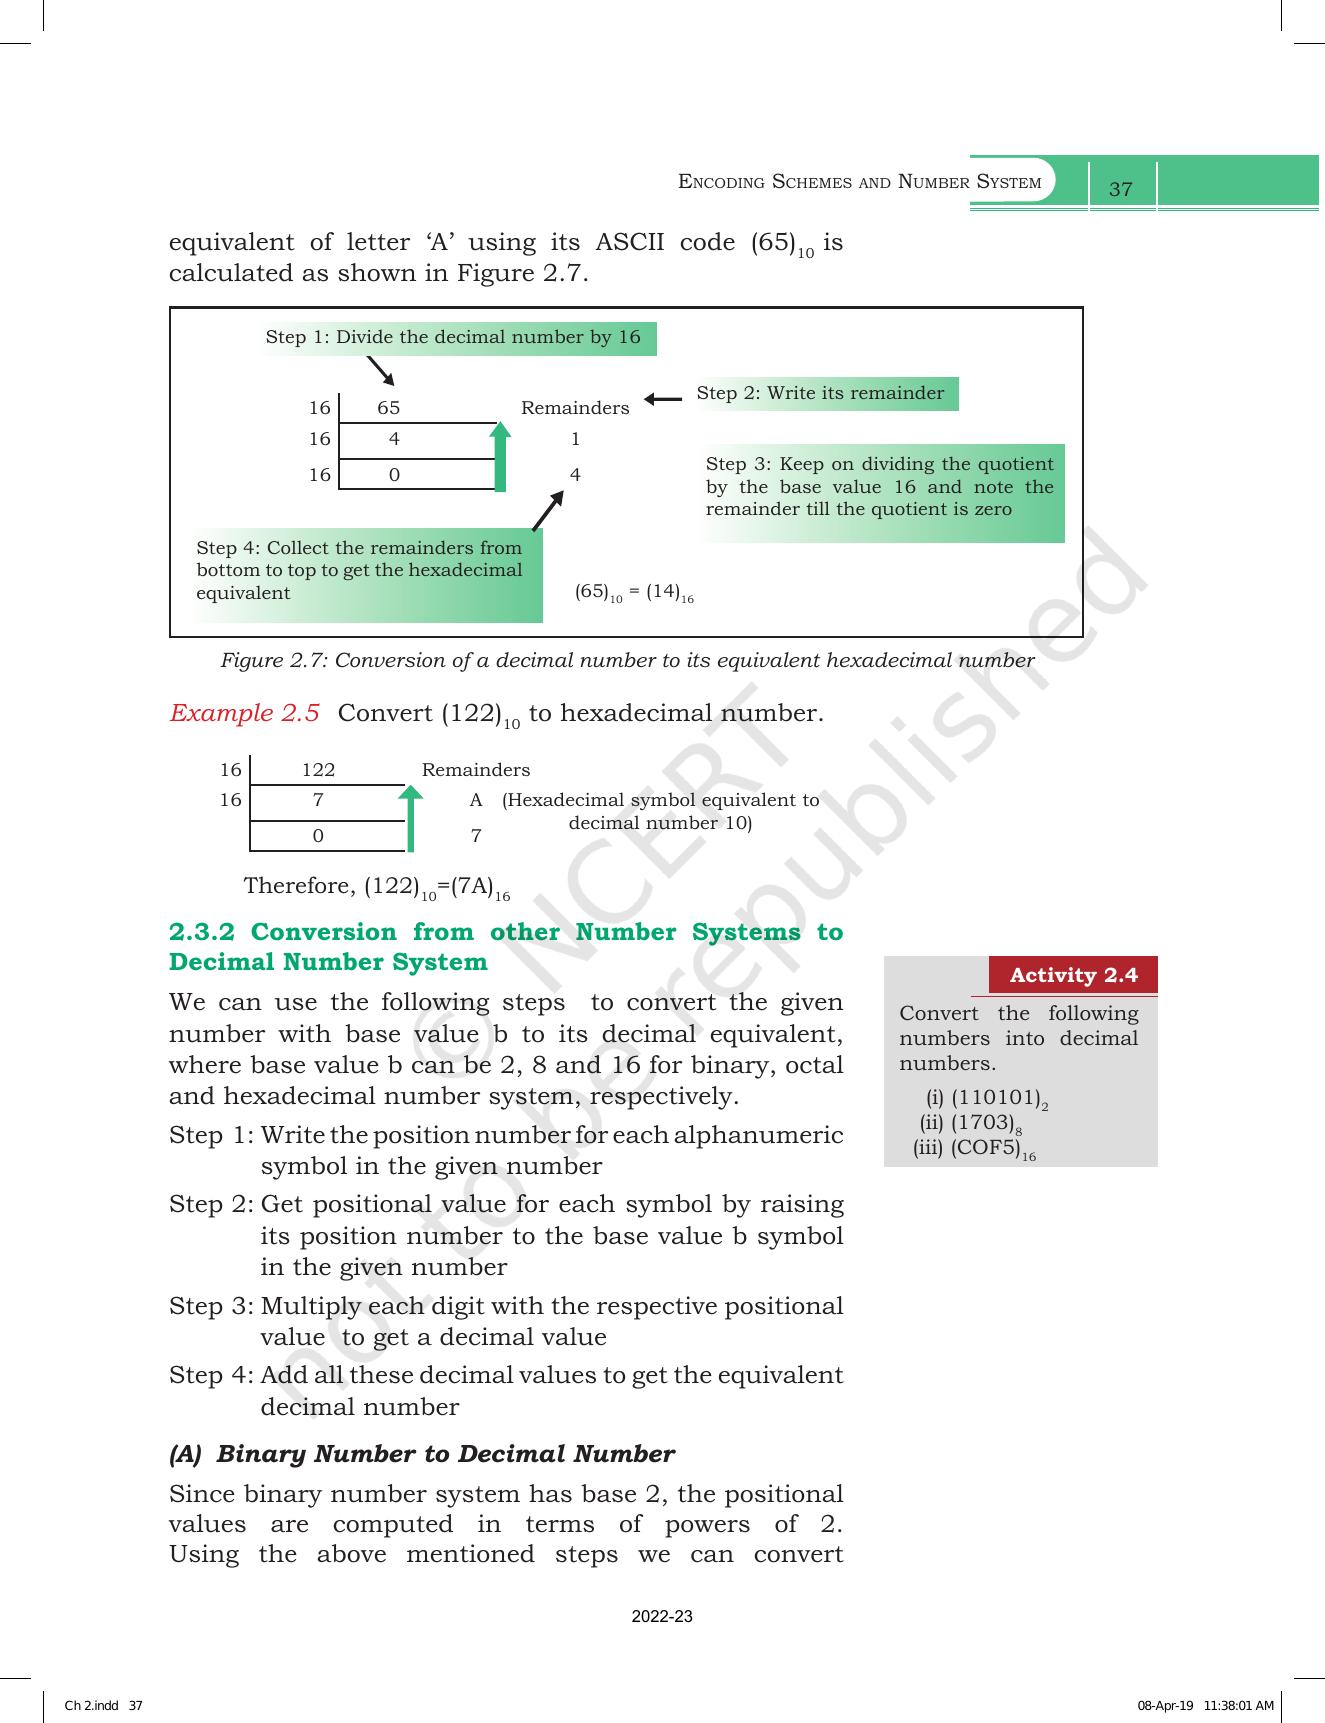 NCERT Book for Class 11 Computer Science Chapter 2 Encoding Schemes and Number System - Page 11